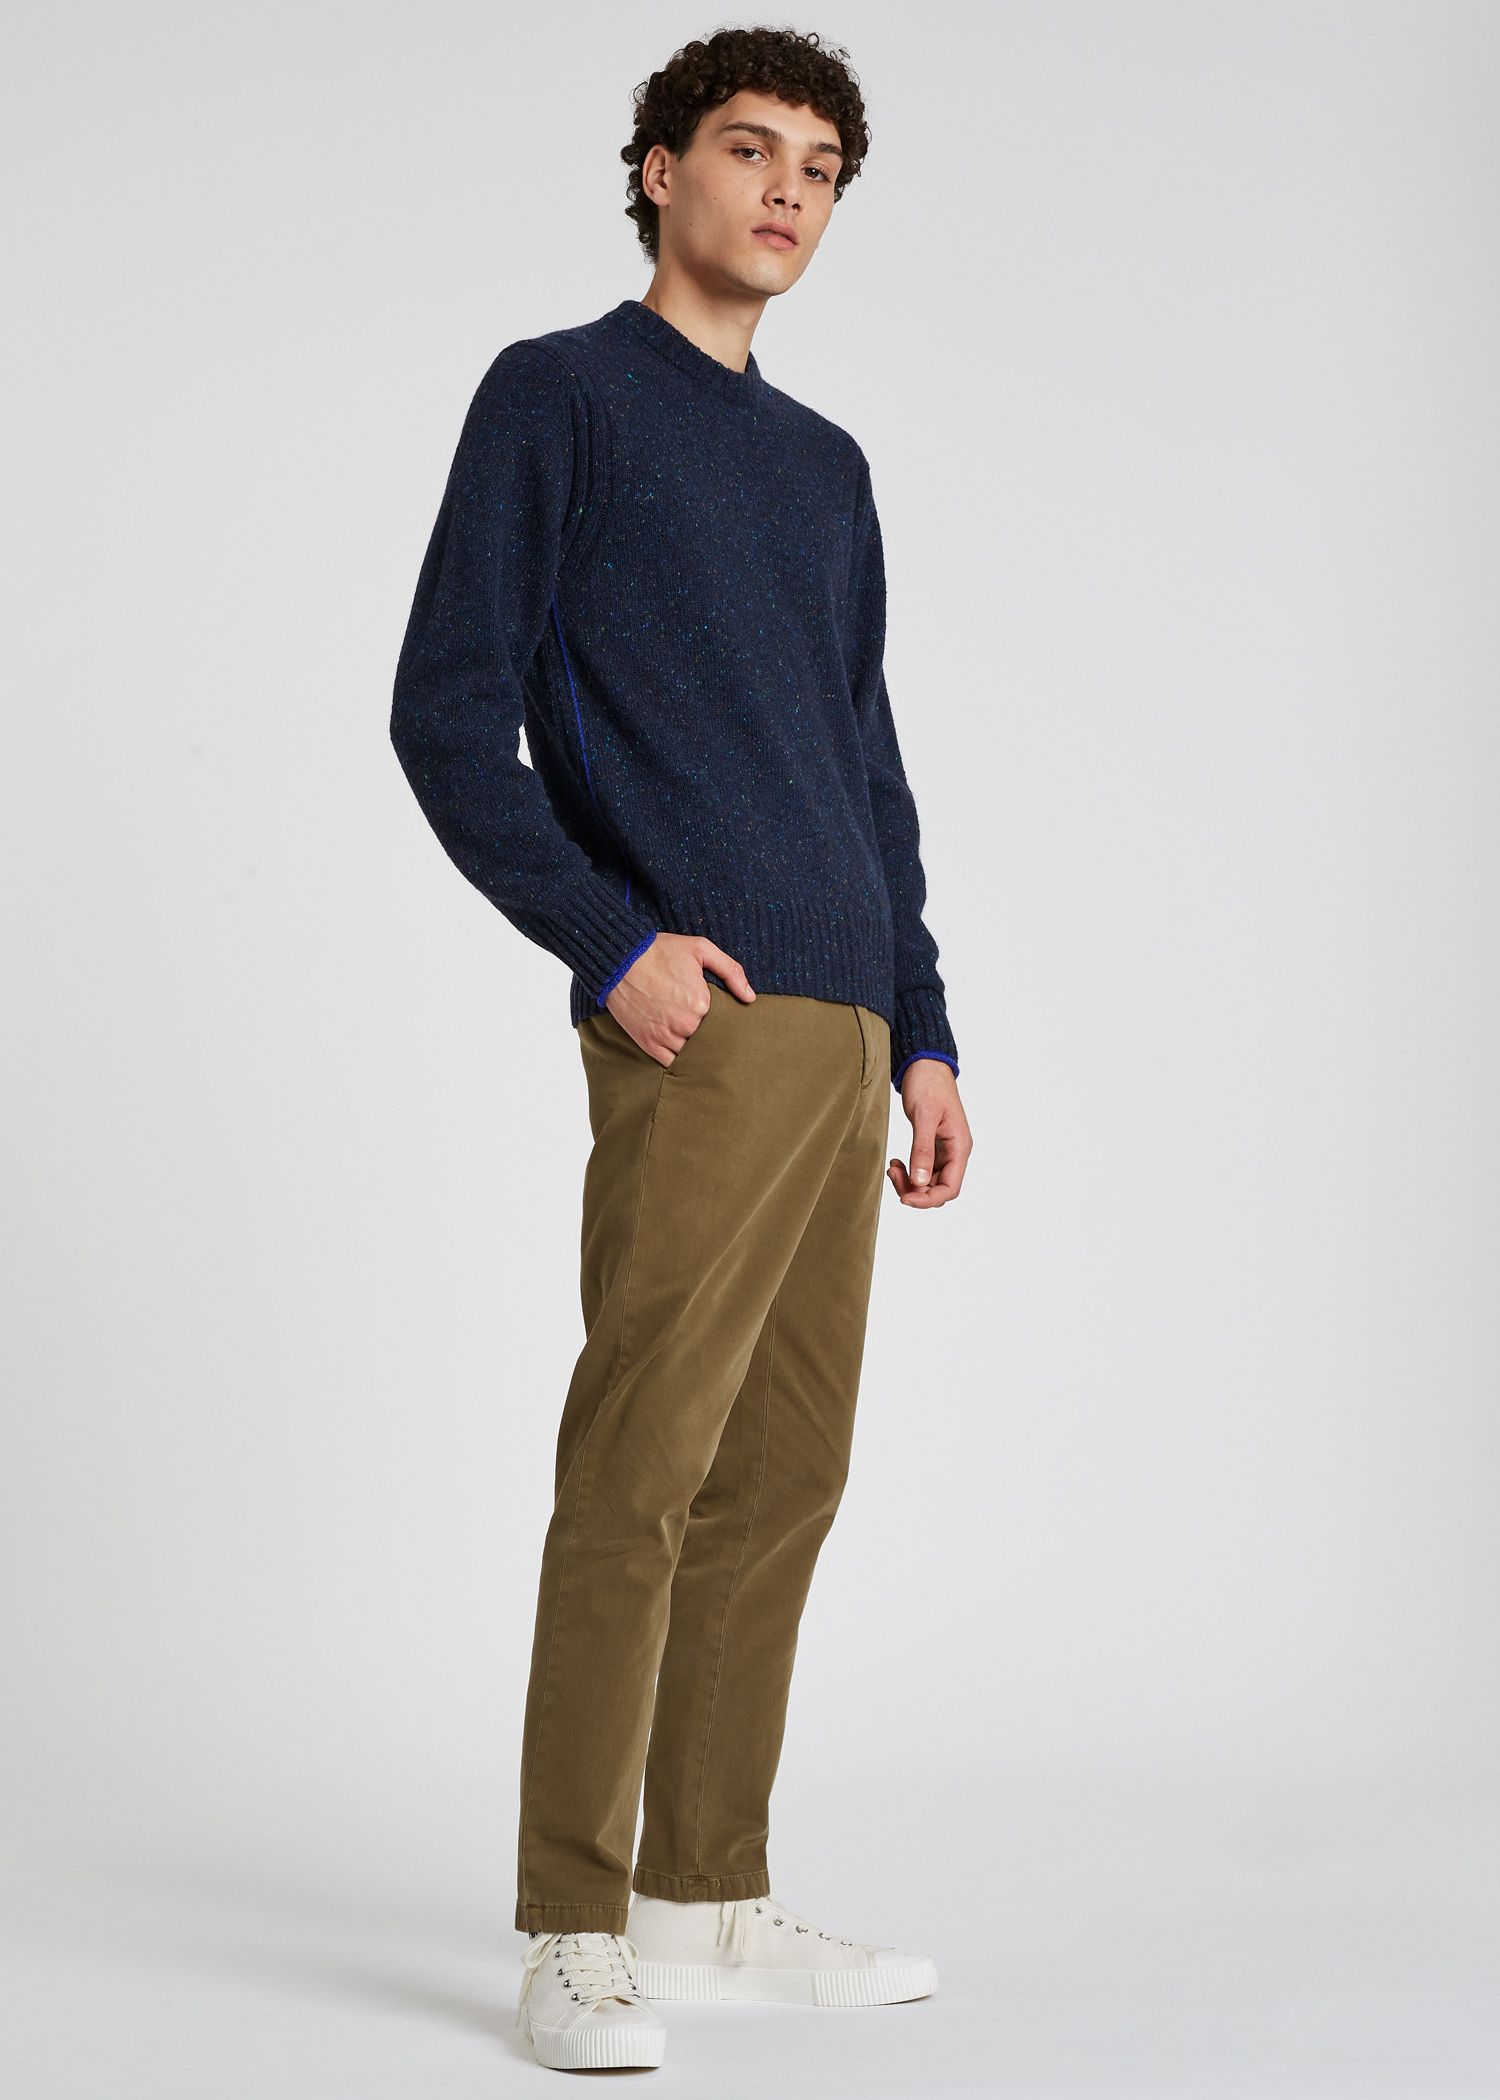 h and m sweater mens